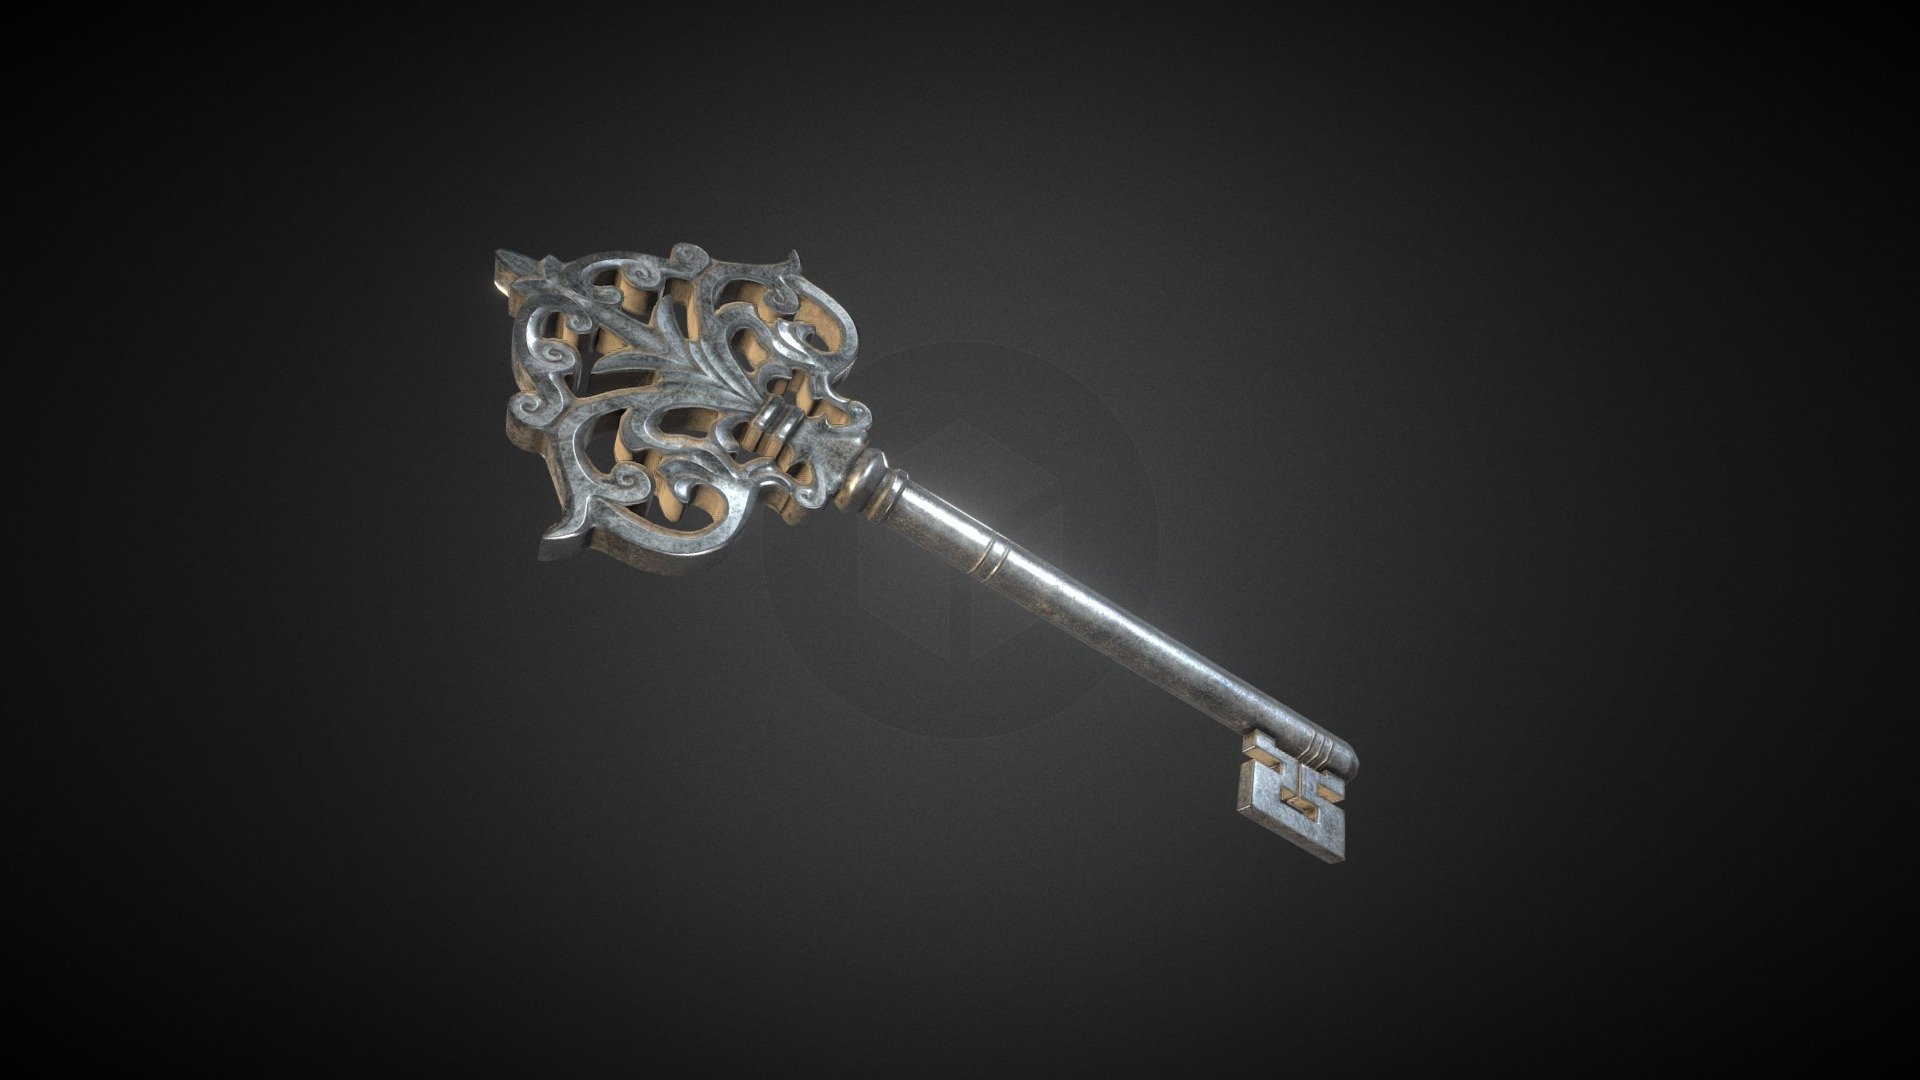 An old key, made to be an asset in a sadly discontinued game.
1024x256 Textures.

Blender: Modelling
Marmoset Toolbag: Baking
Substance Painter: Texturing - Old Key - Download Free 3D model by TheFalkonett 3d model